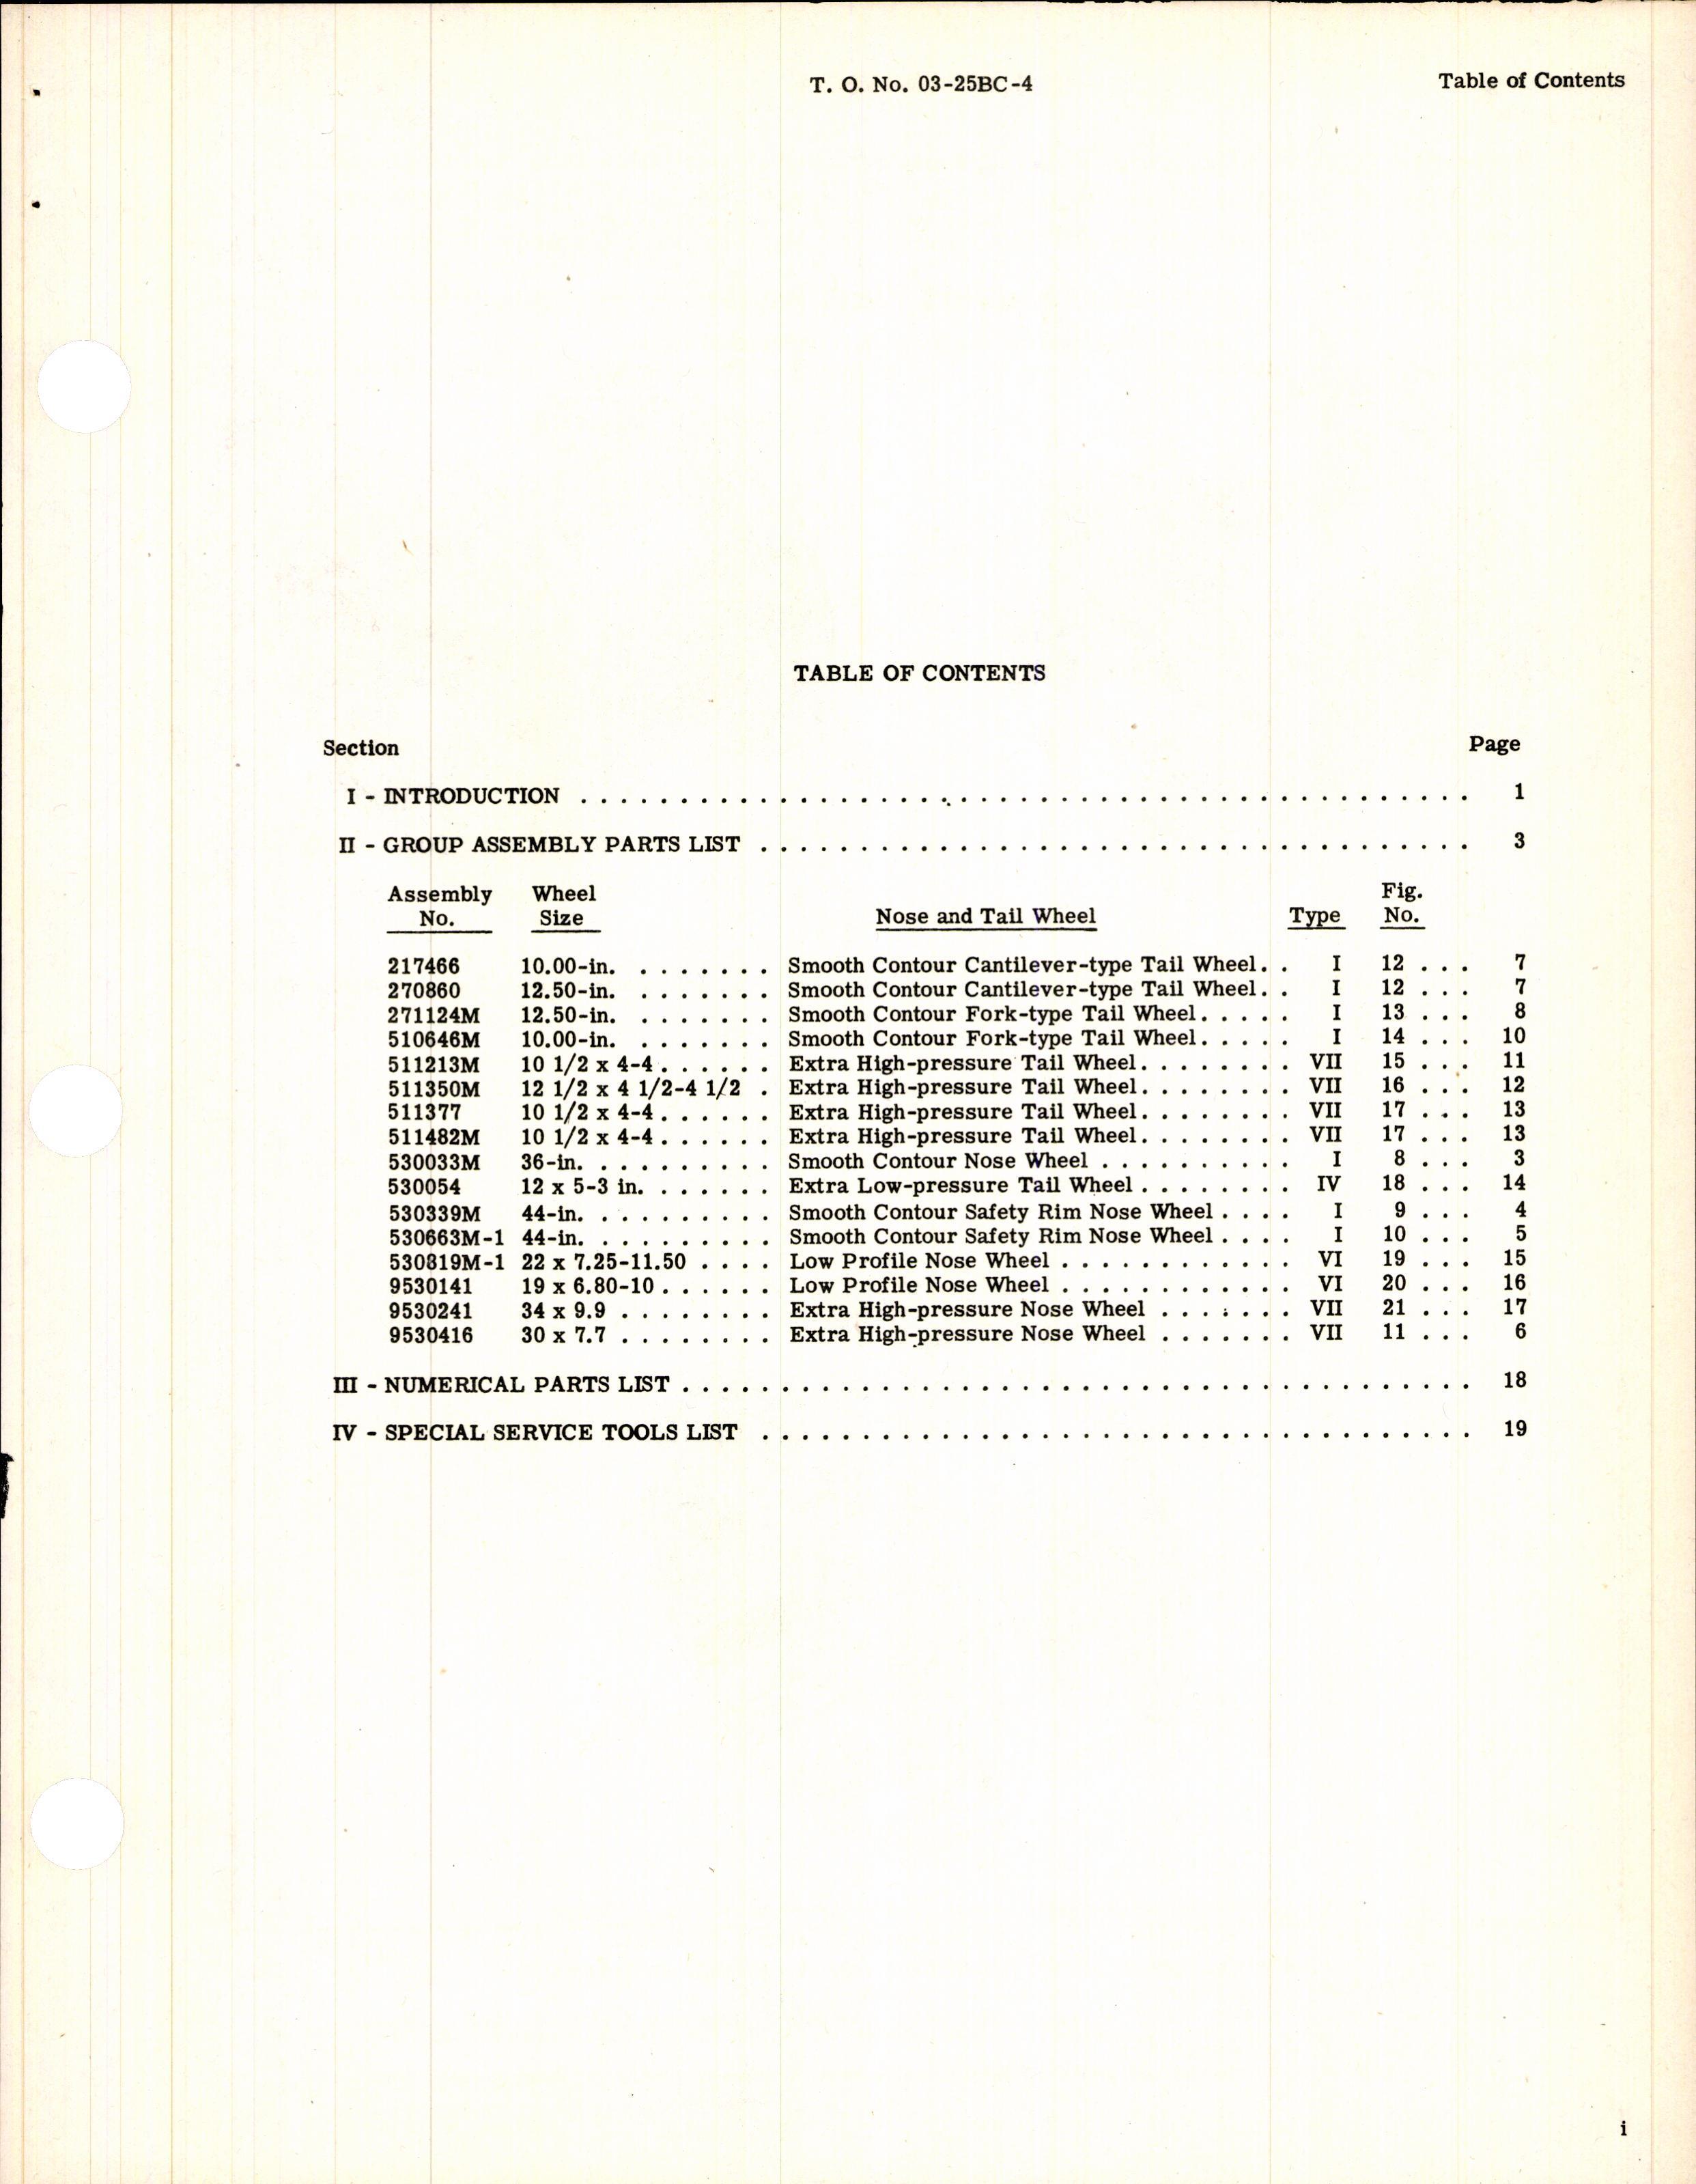 Sample page 3 from AirCorps Library document: Parts Catalog for Goodyear Nose and Tail Wheels